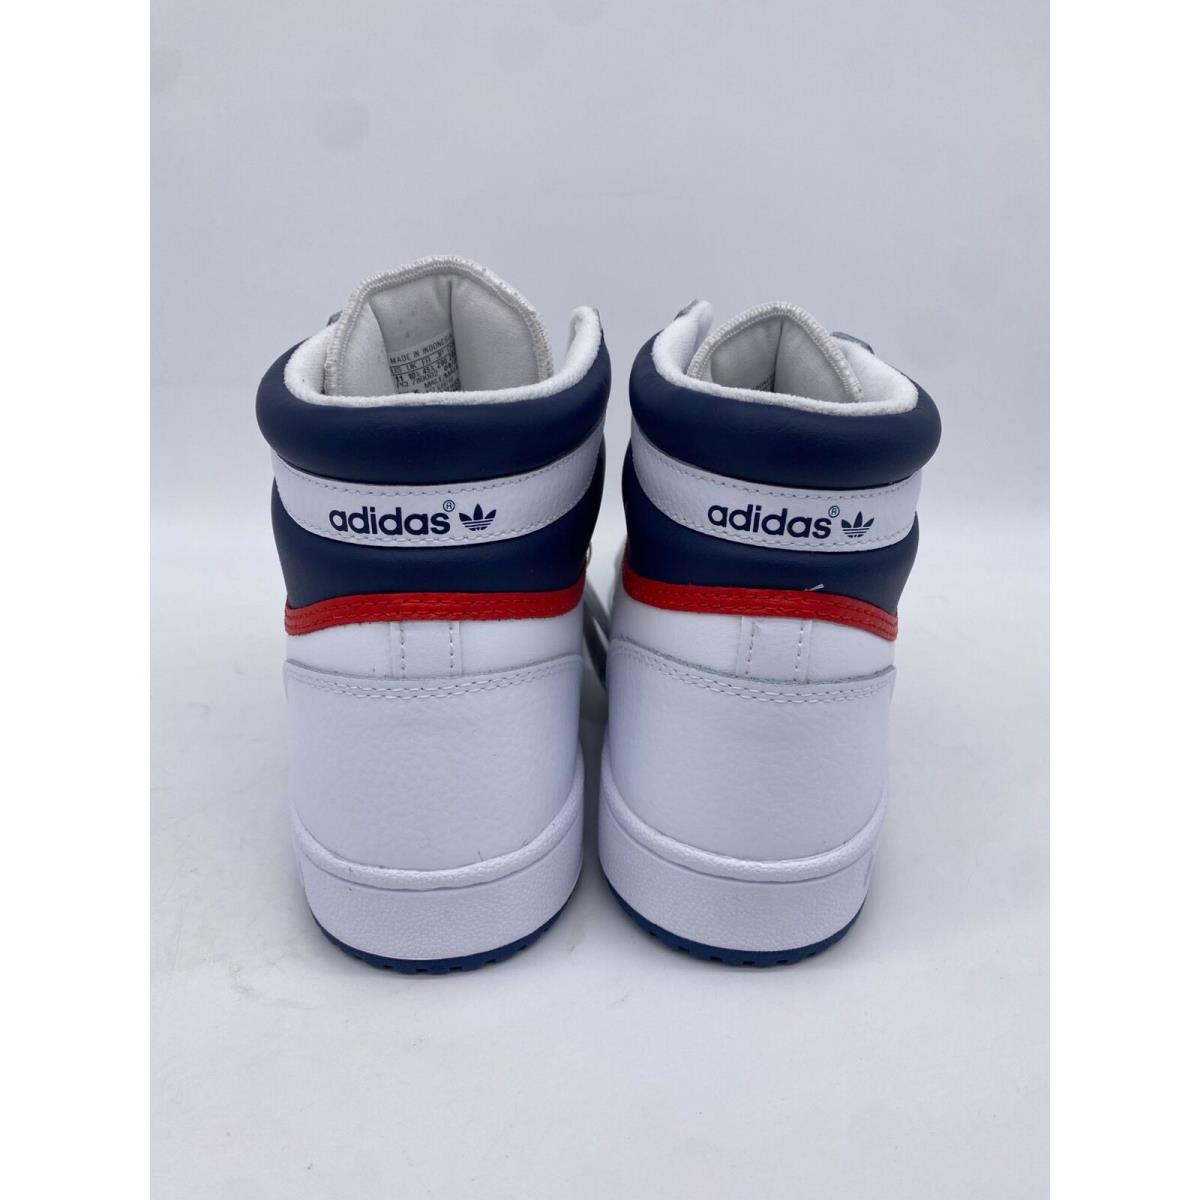 Adidas shoes  - white/blue/red 4